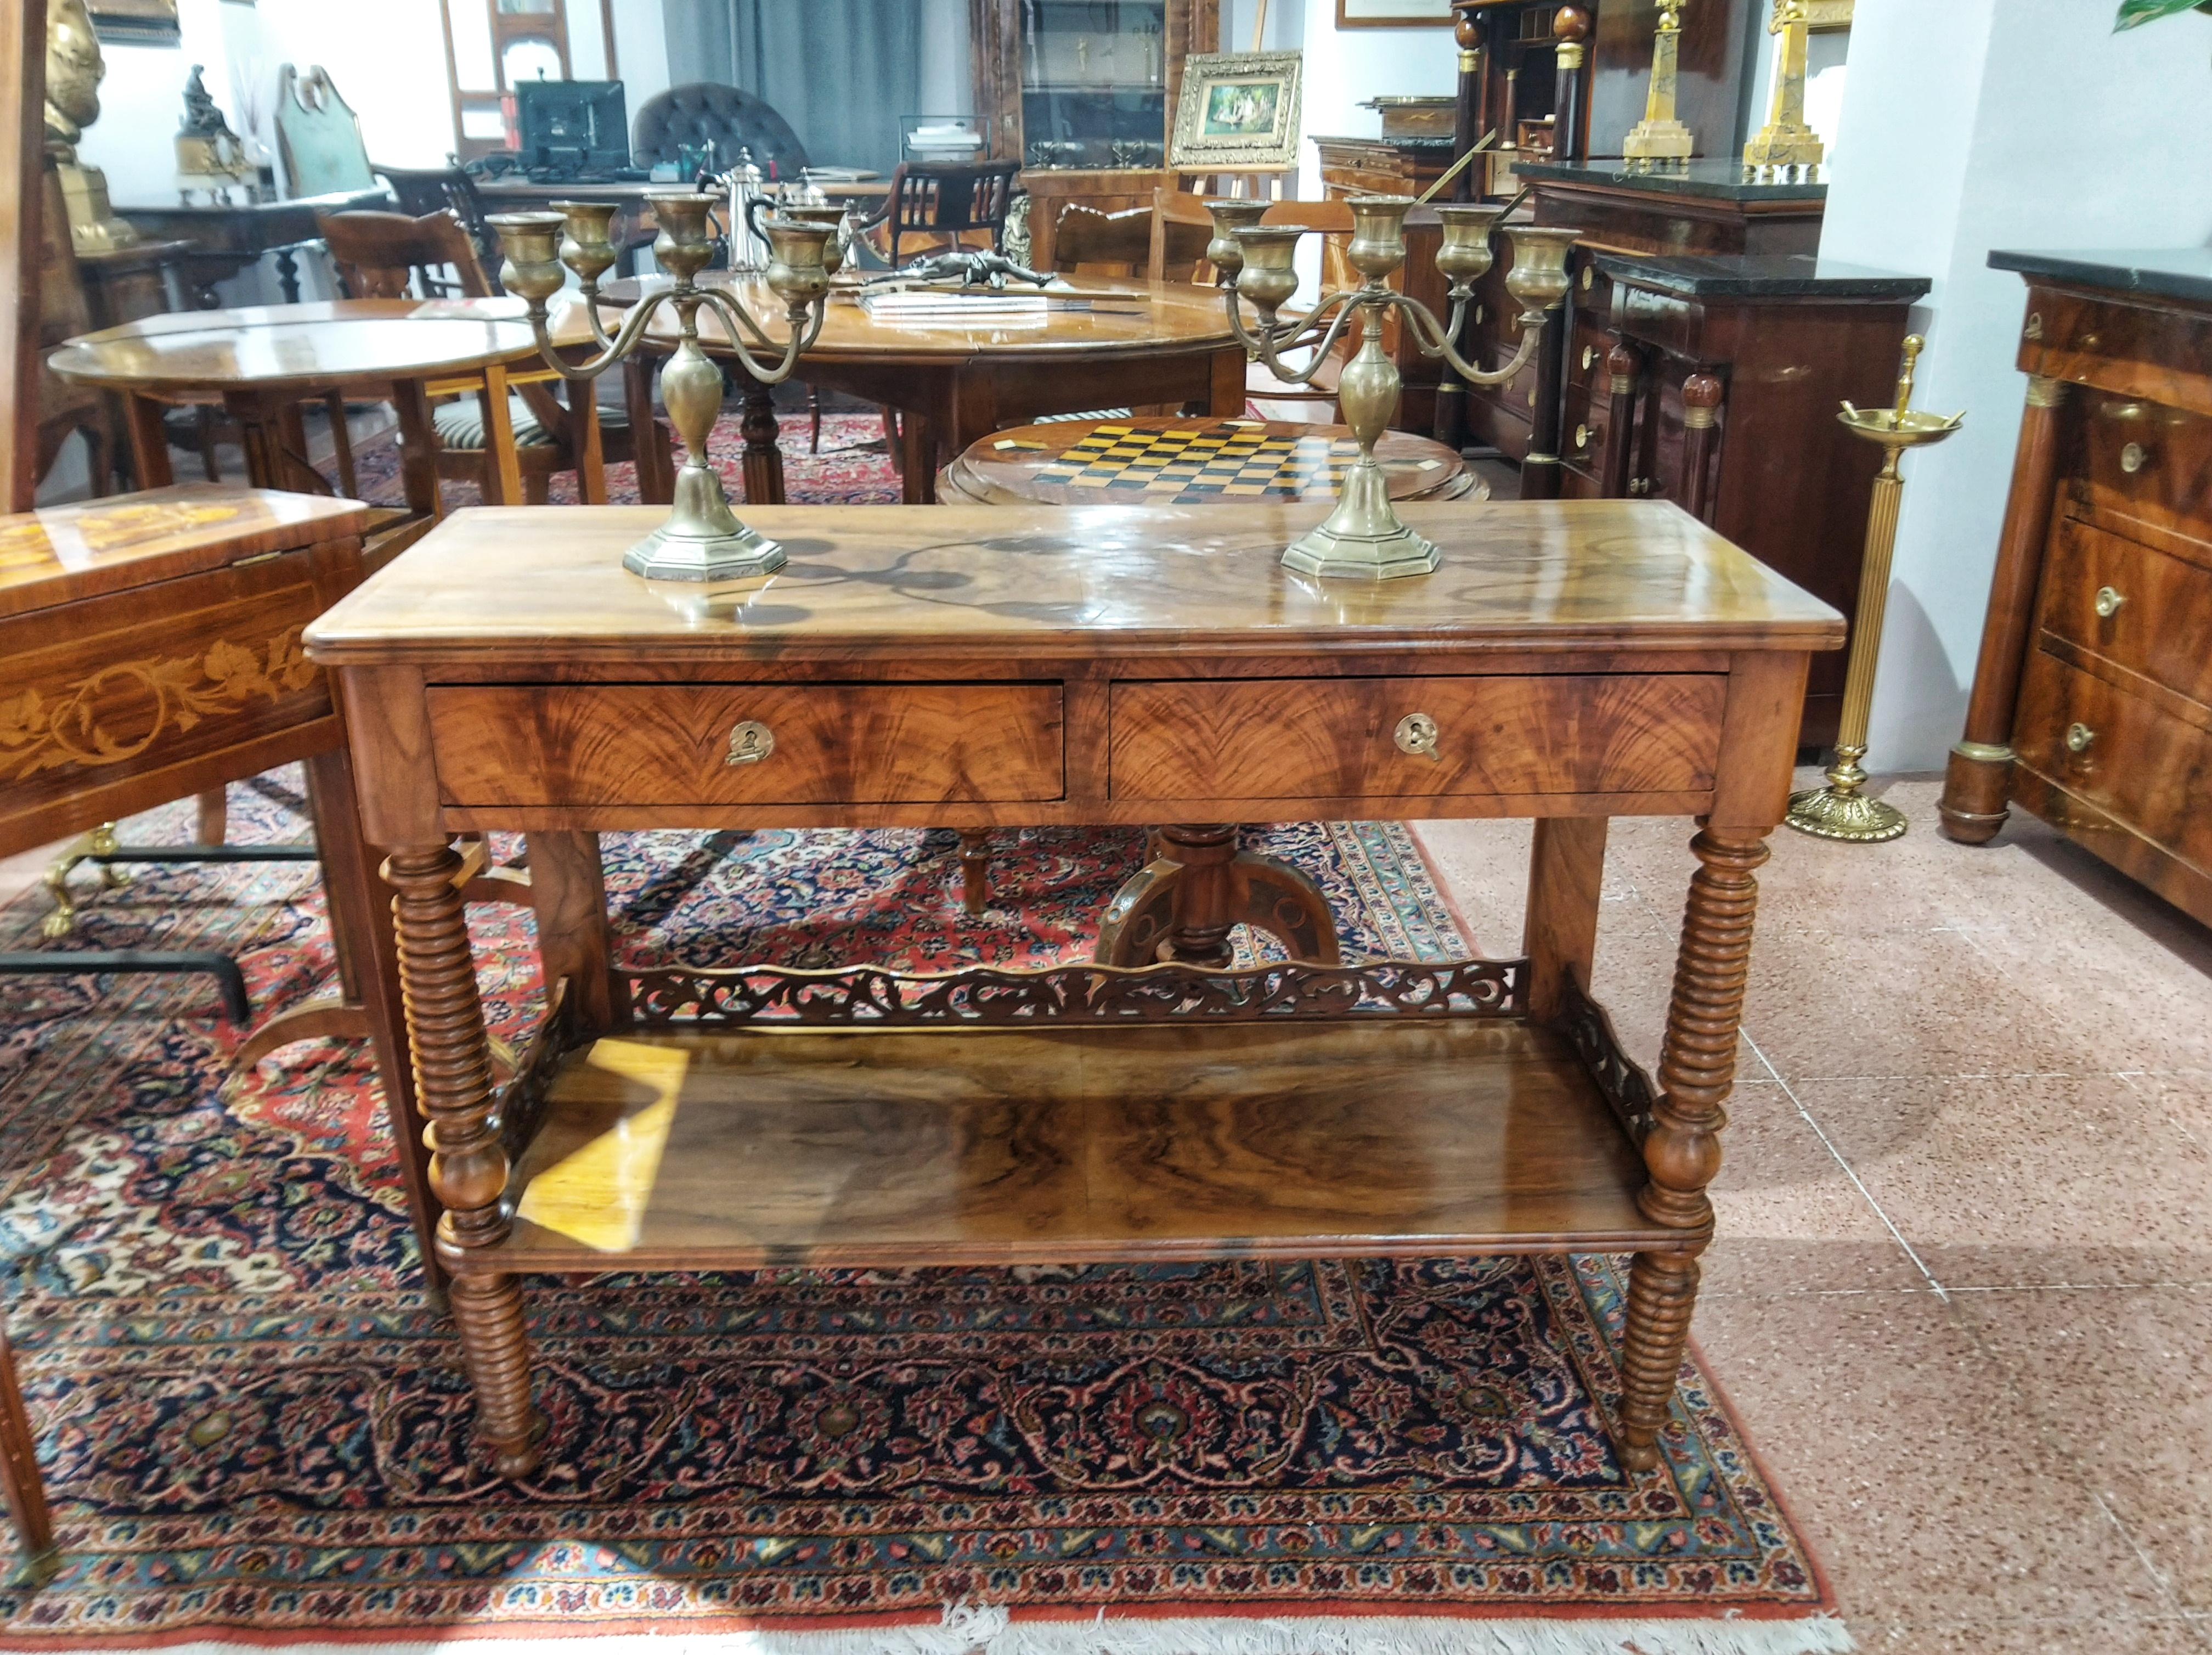 Fine English console table, Regency, mid-19th century, falme walnut an two working keys.

Pretty console table totally restored, with two drawers and two working keys.

Regency architecture encompasses classical buildings built in the United Kingdom